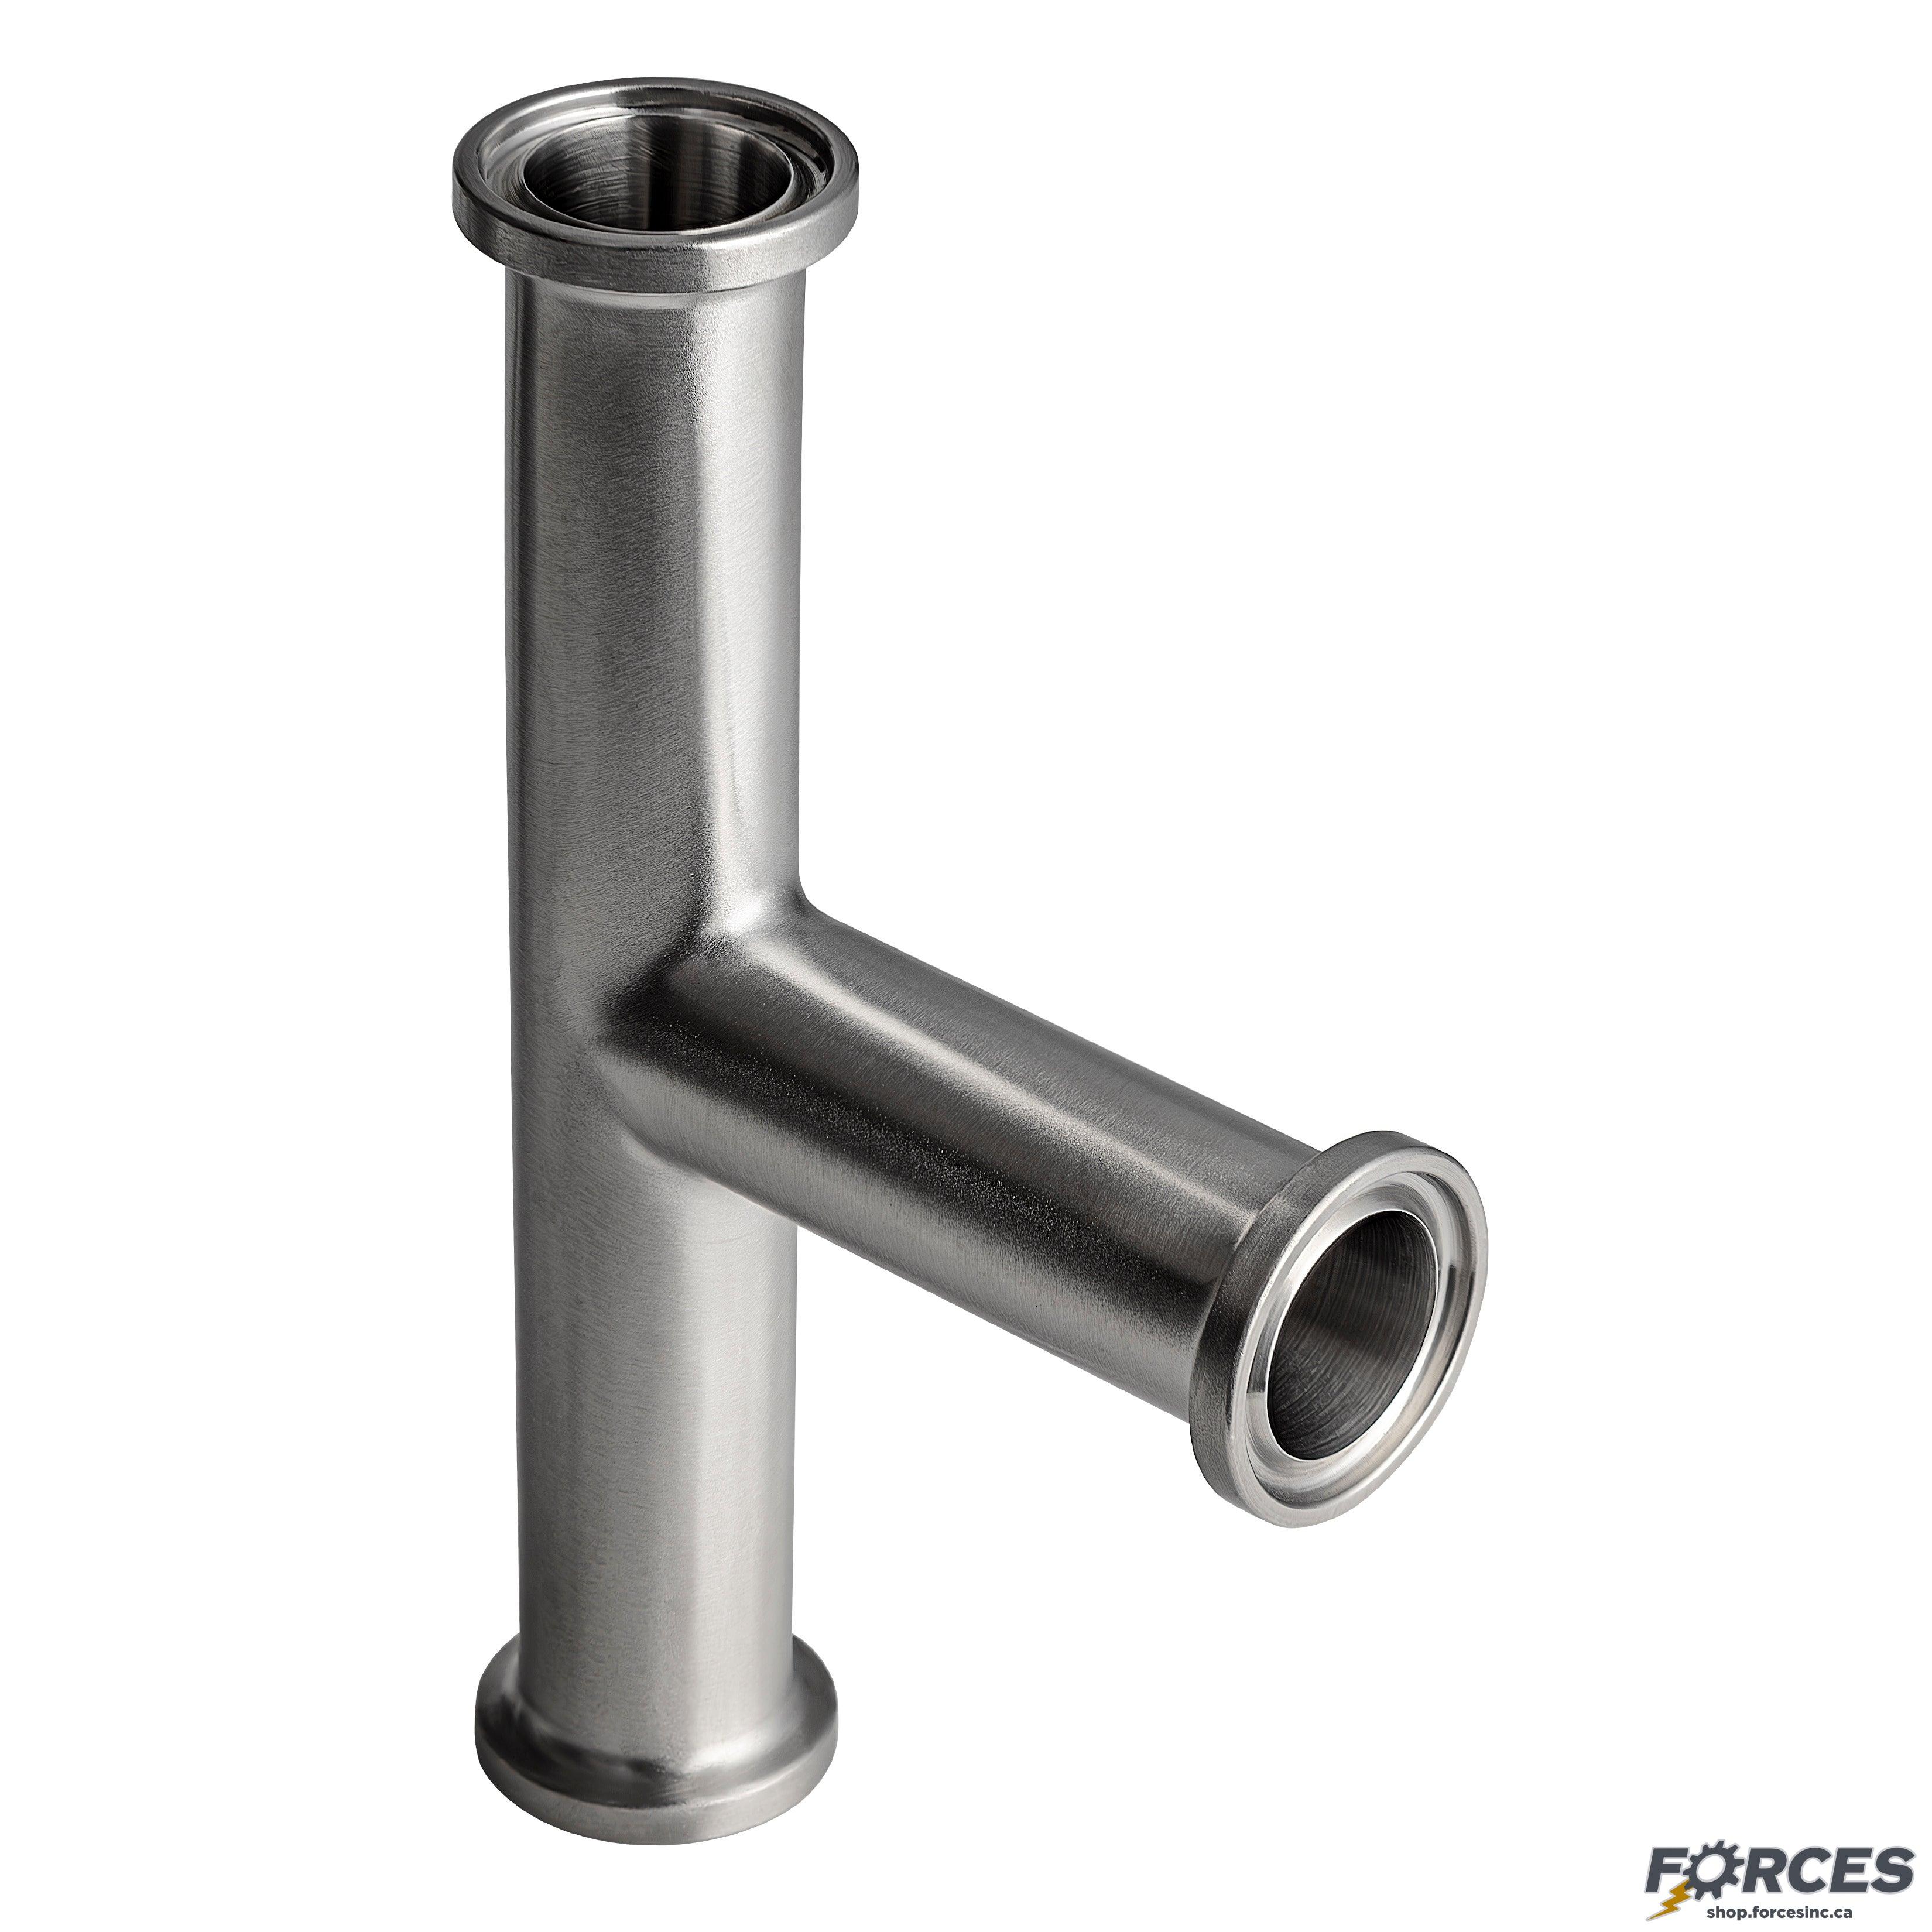 4" Tri-Clamp Tee - Stainless Steel 304 - Forces Inc